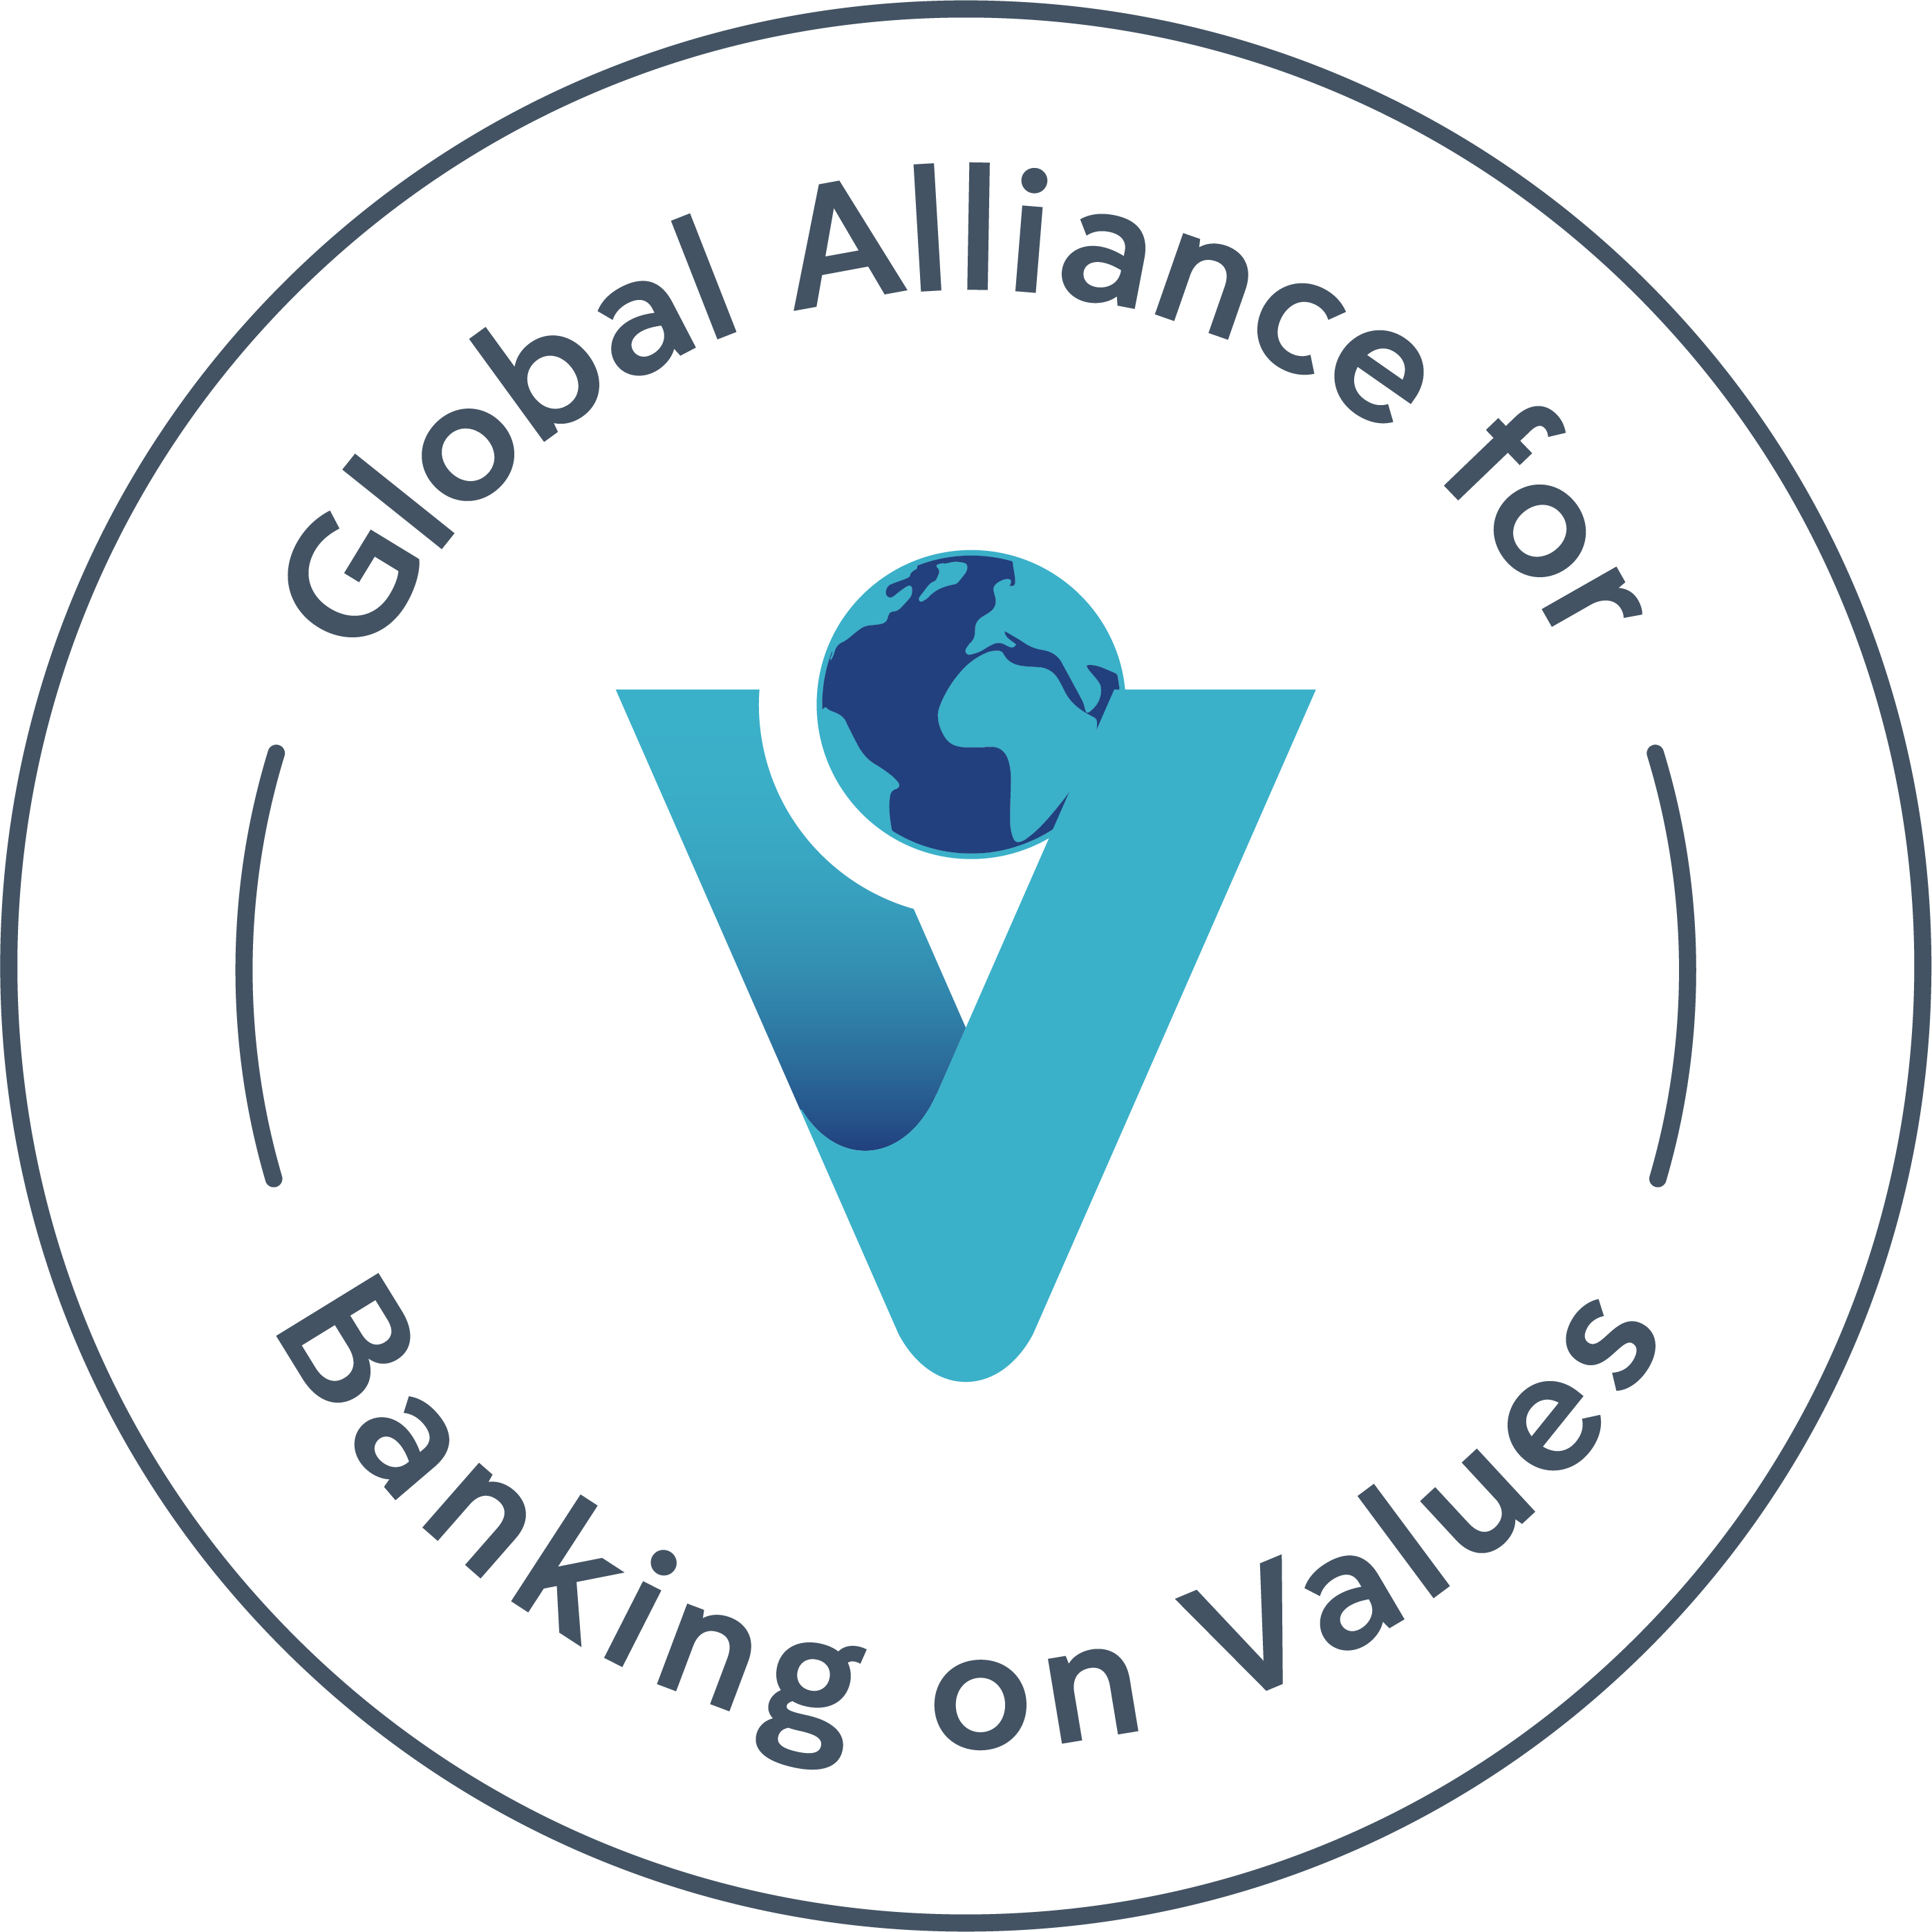 Global Alliance for Banking on values